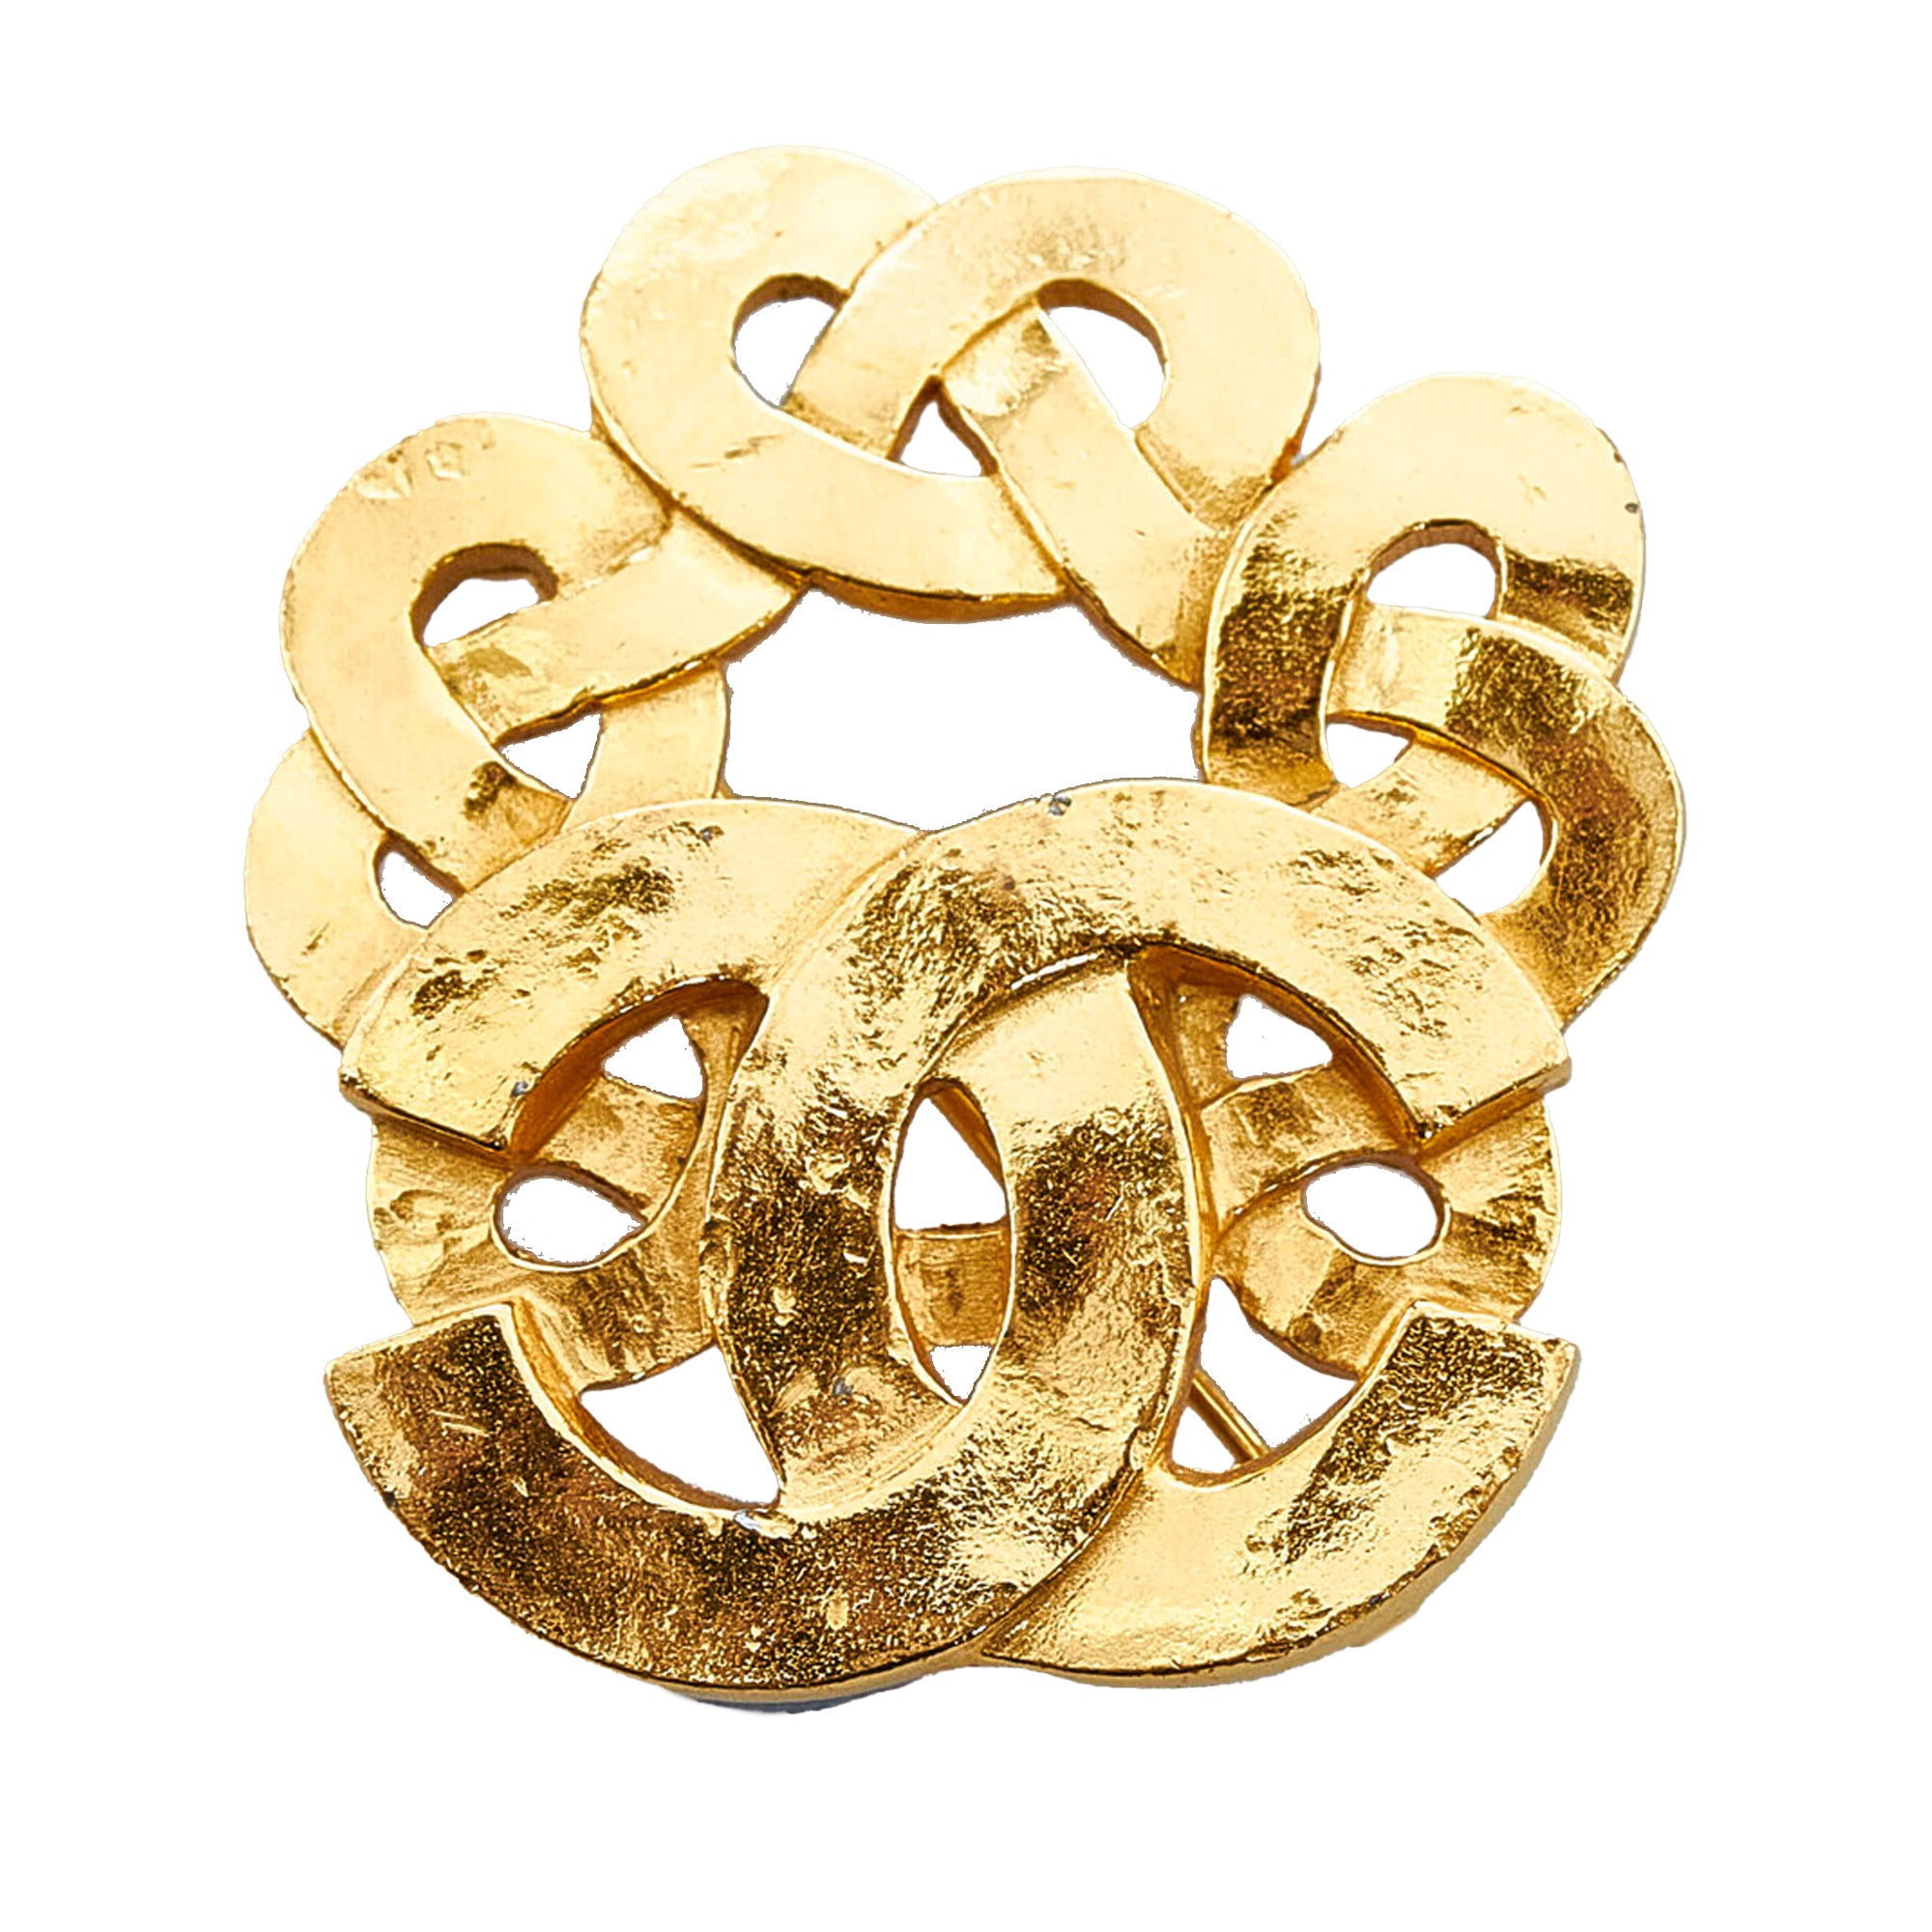 Chanel Metal Brooch With Back Pin Closure in Metallic